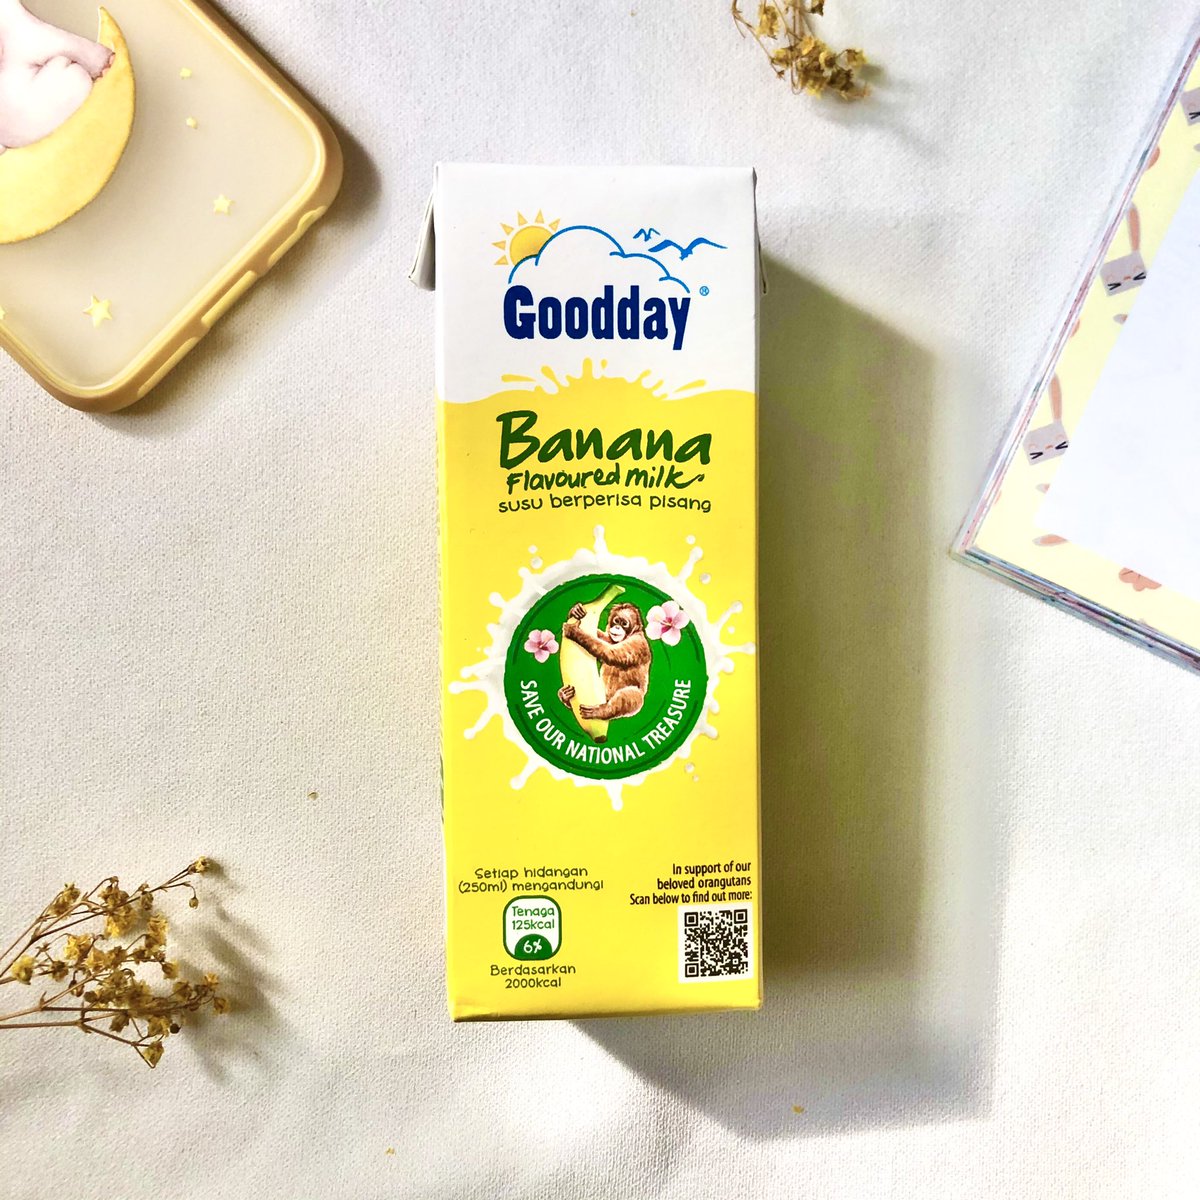 Hi guys.. Korang kalau keluar ke mana mana ada nampak air goodday susu pisang ni? The campaign behind this drink caught my attention and i want to share it with you guys!(not paid promotion, i just love the campaign)